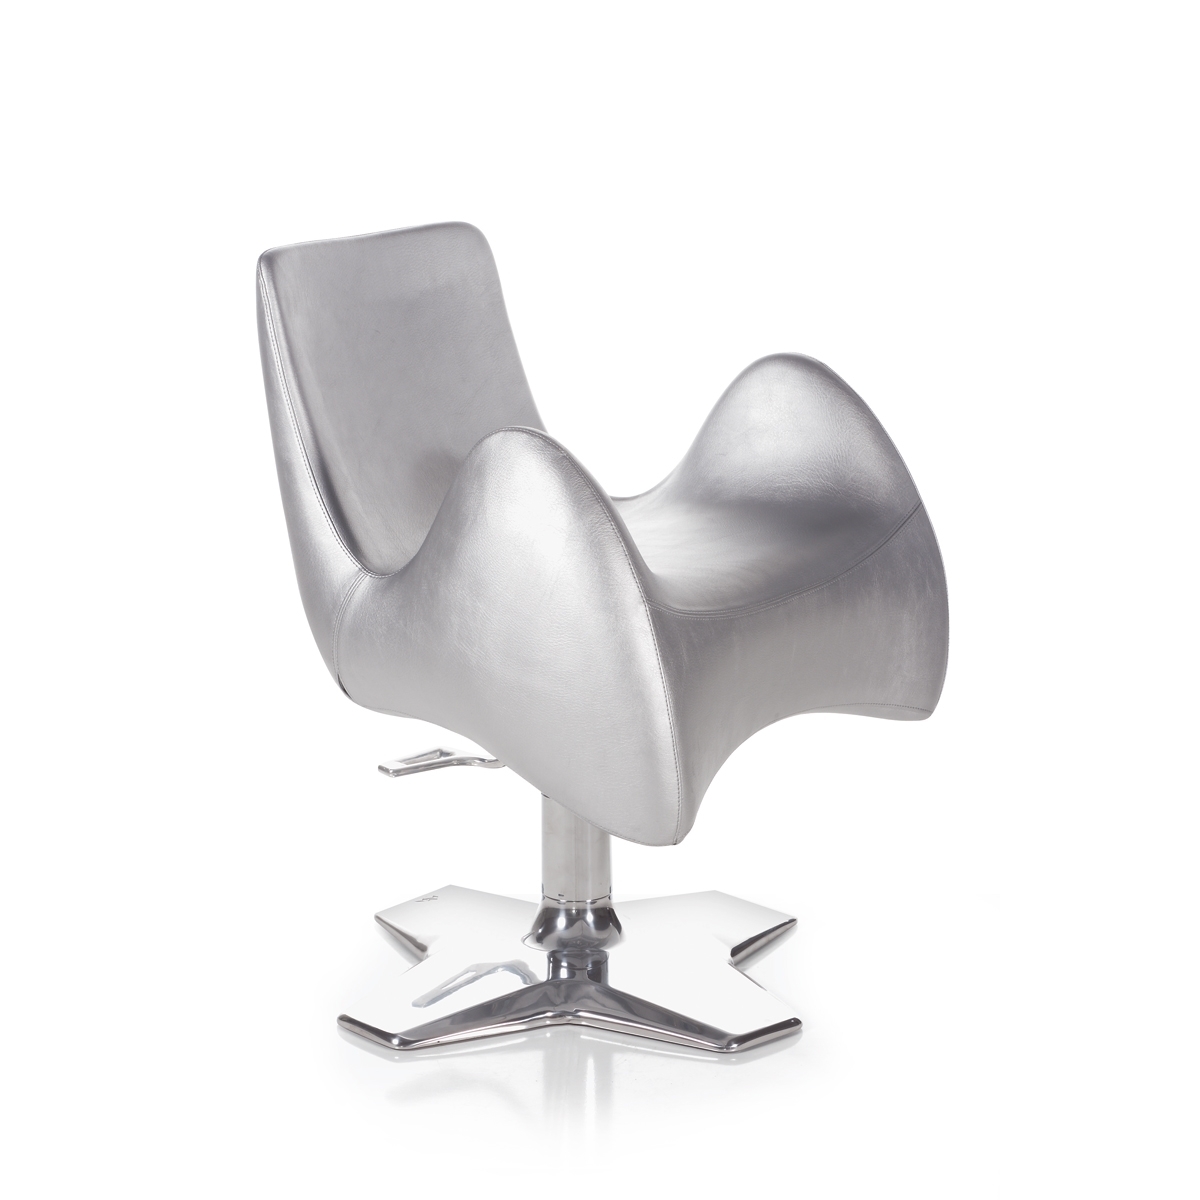 Flow Styling Chair by Gamma & Bross Spa